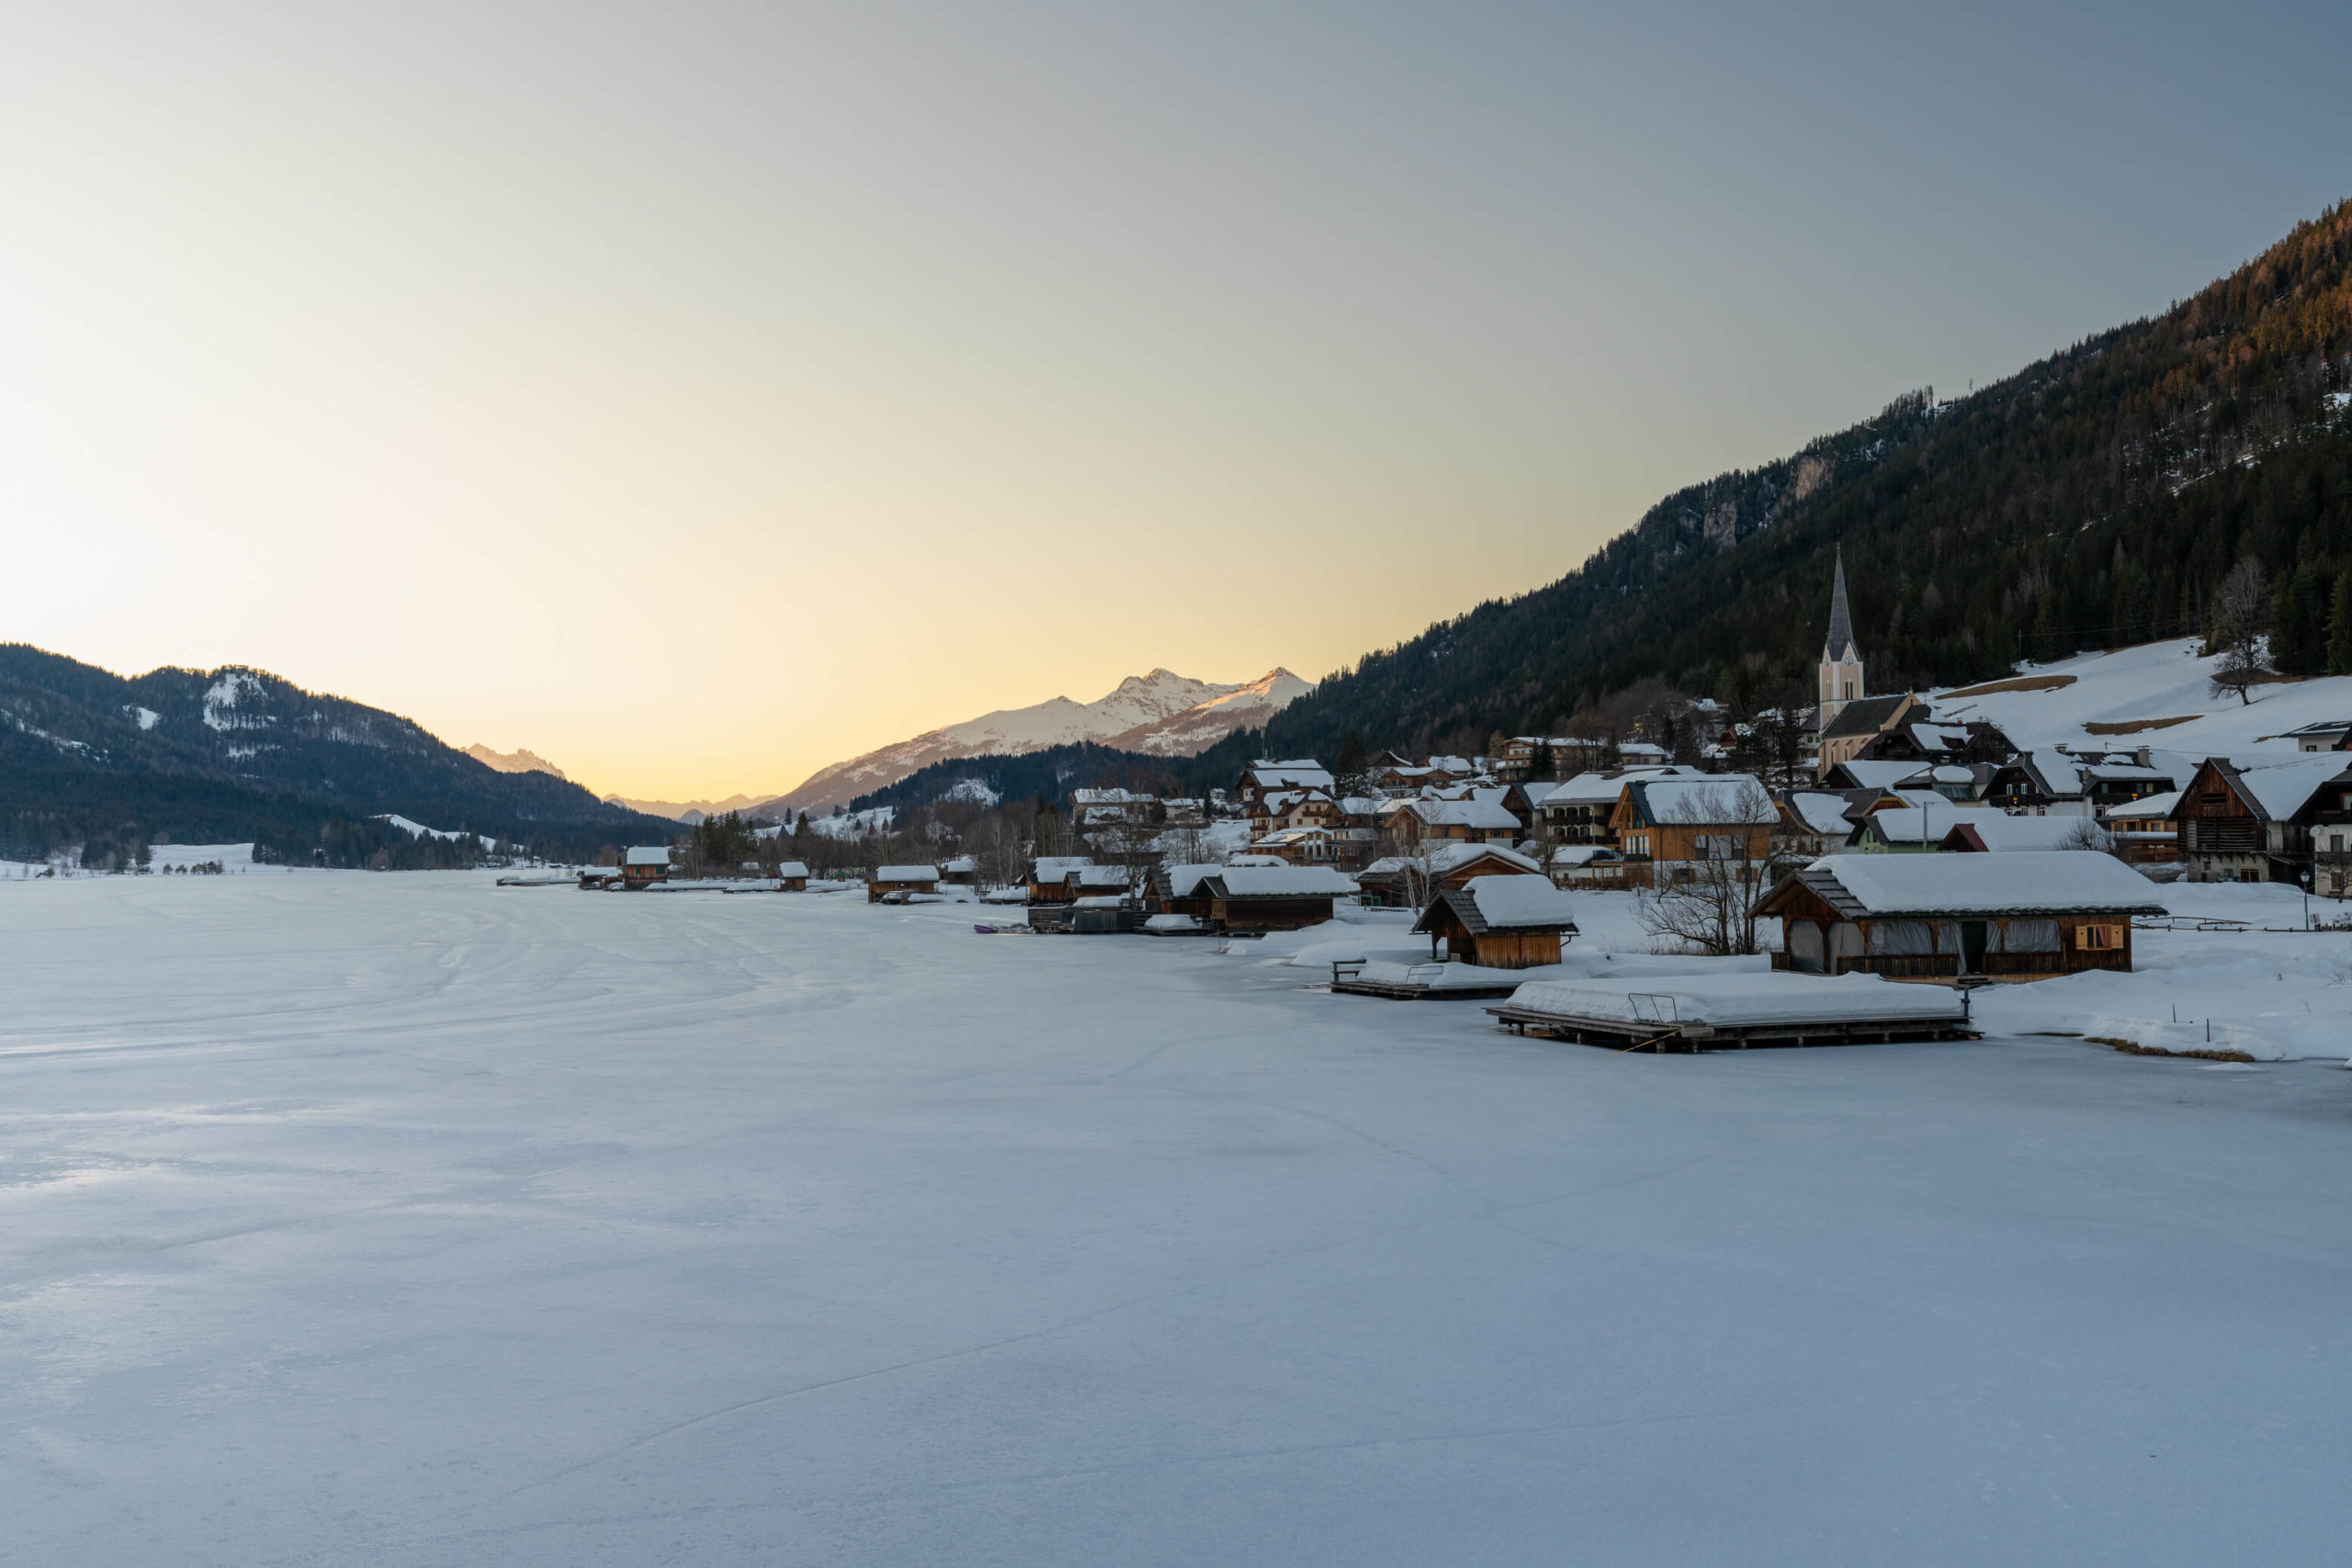 Techendorf at sunset on a frozen and snow covered lake Weissensee, Carinthia